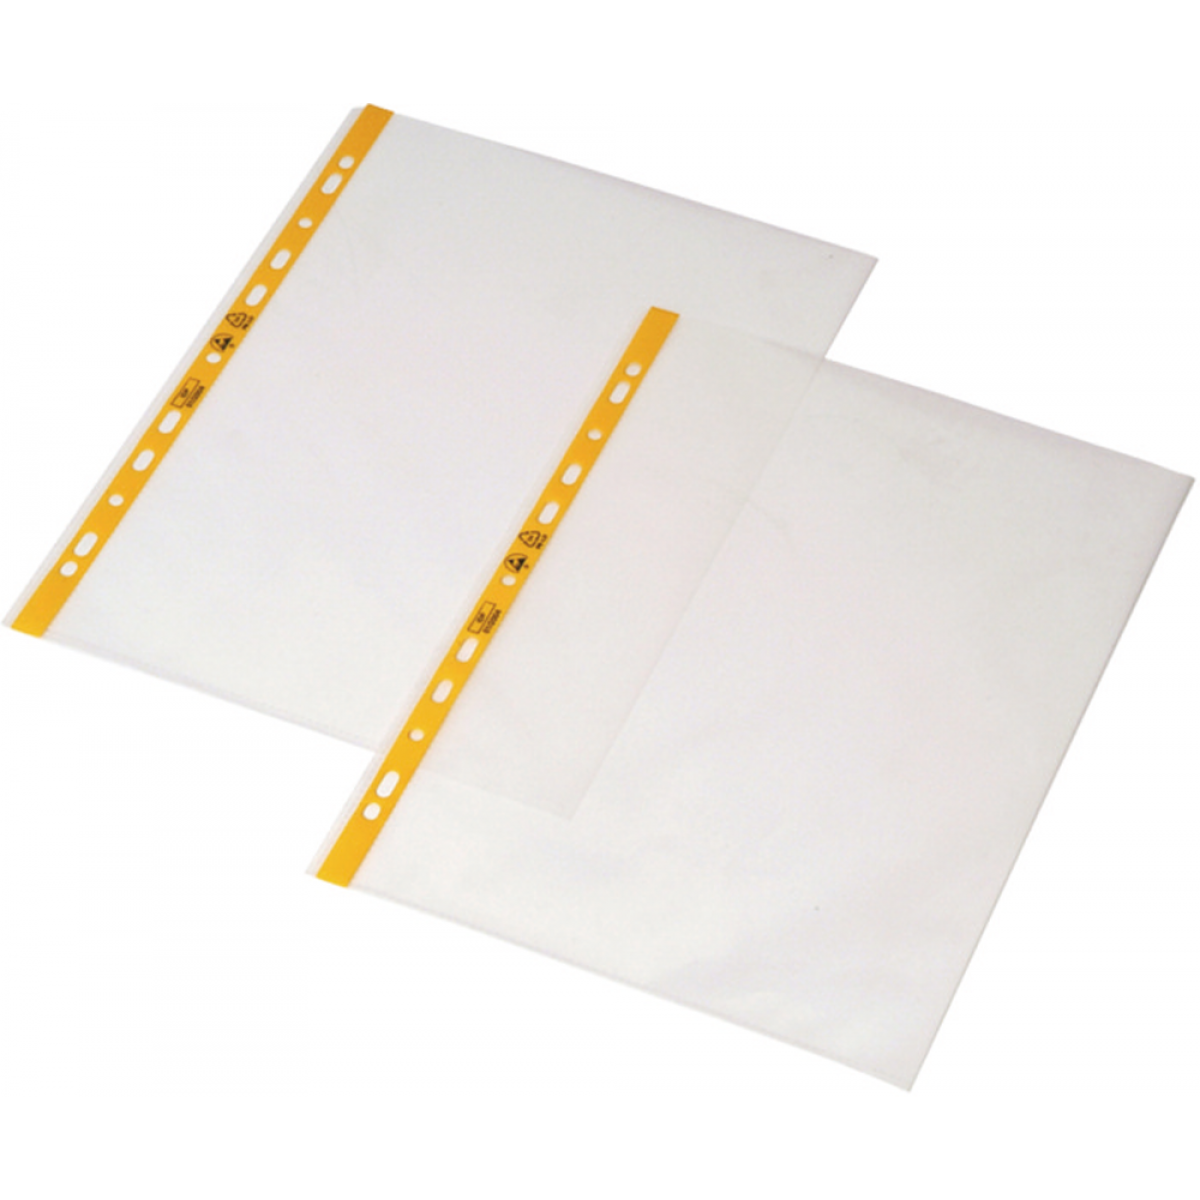 PU:100 piece , Version:1 side open with perforated edge, :DIN A4